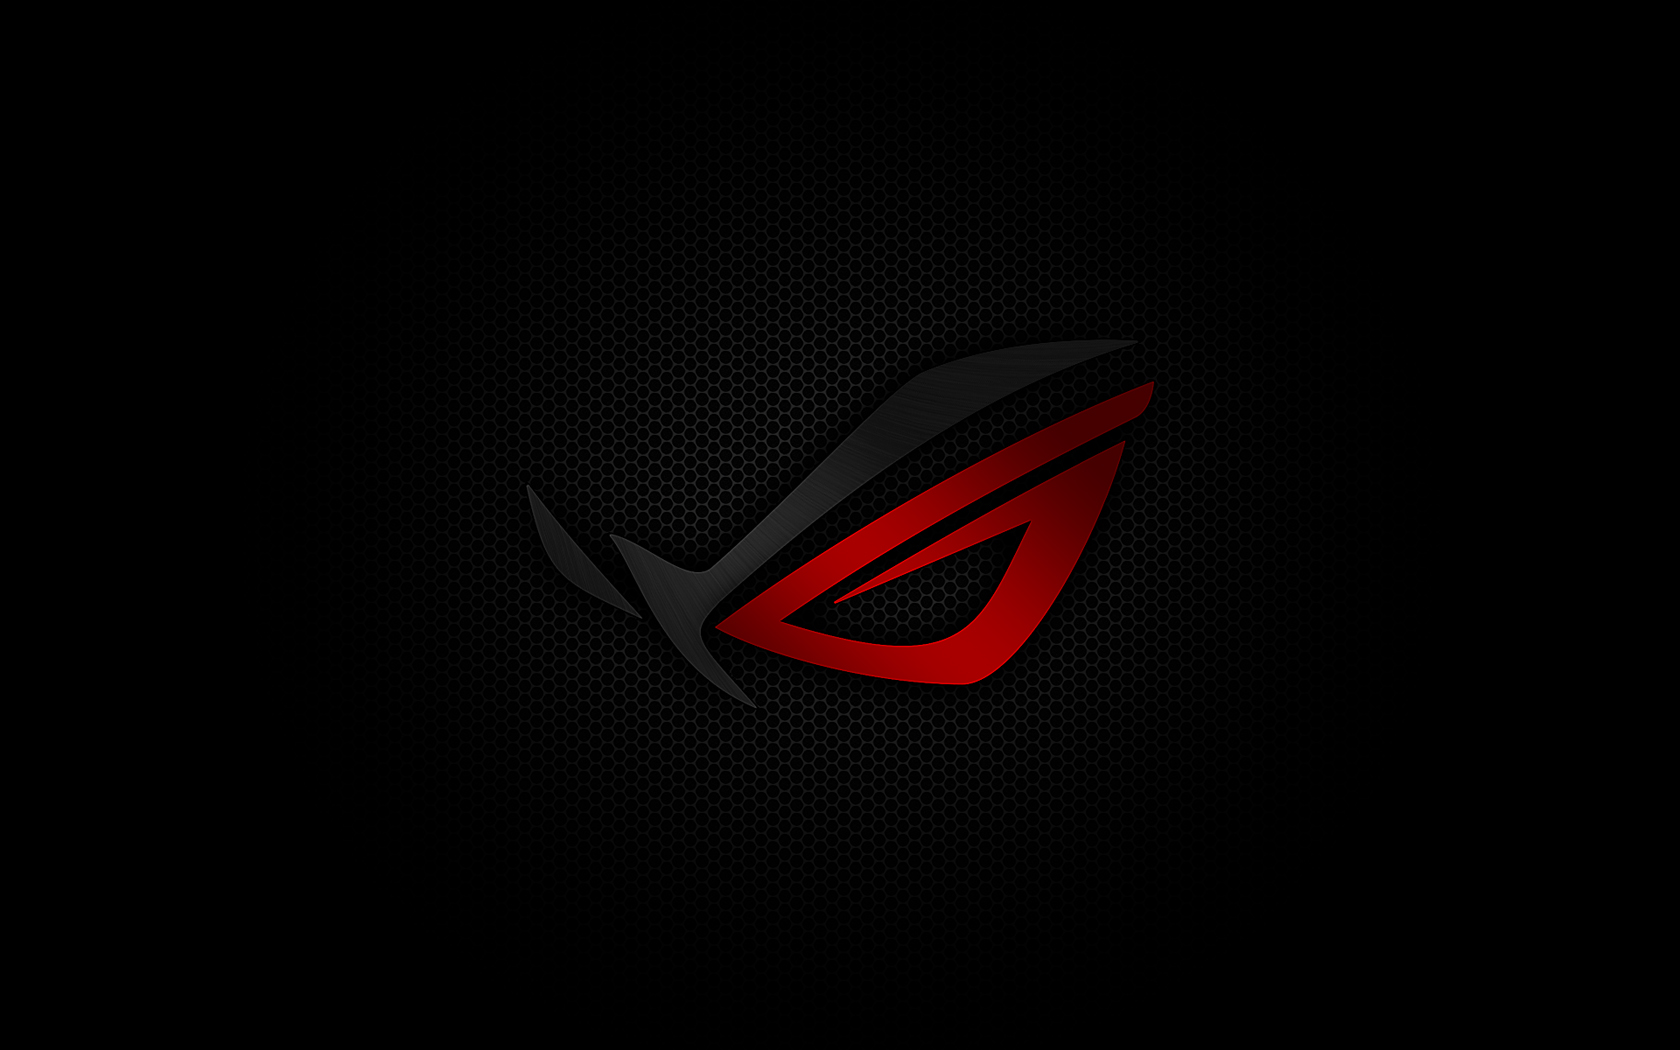 Asus Rog Wallpaper Pack By Blackout1911 Watch Customization